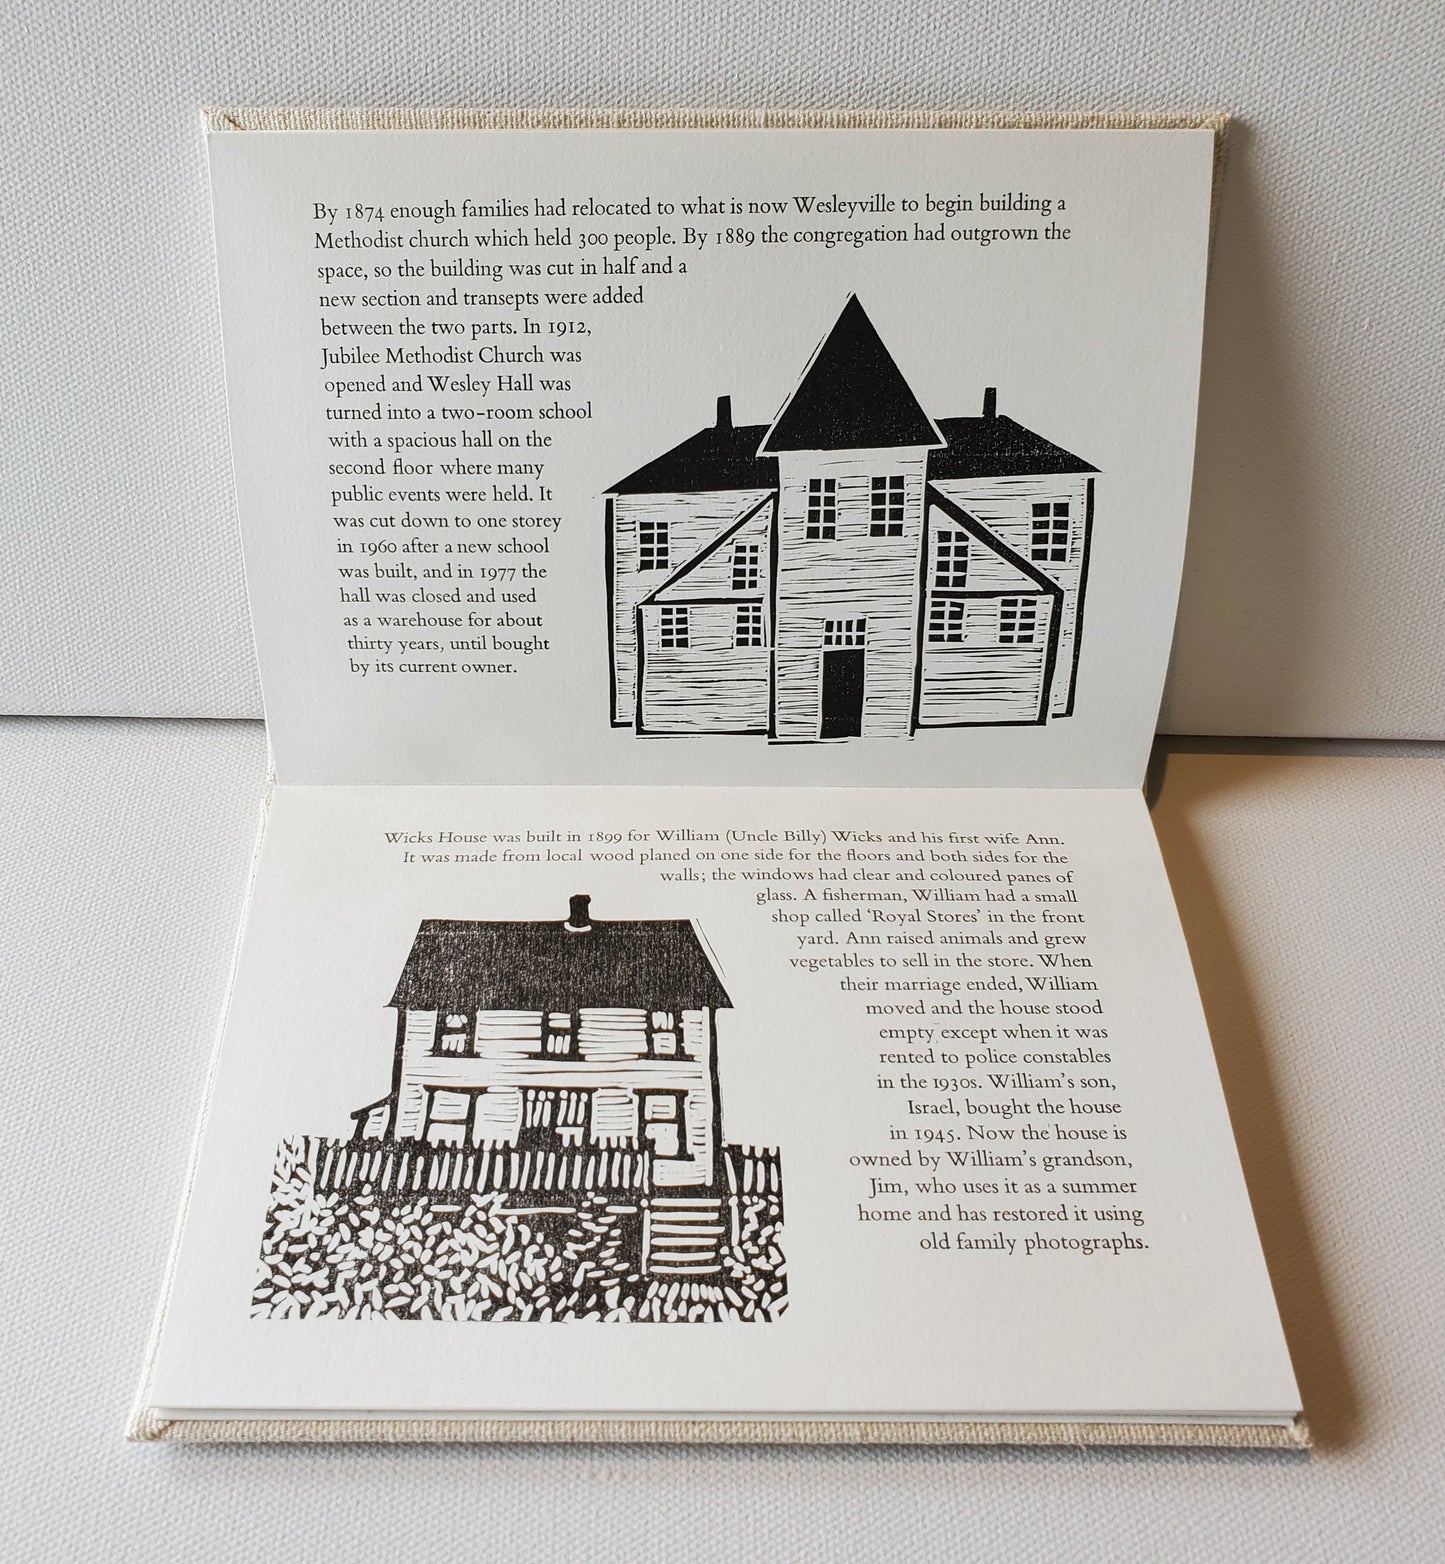 Inside Wesleyville Book showing Wesley Hall and the Wicks House.